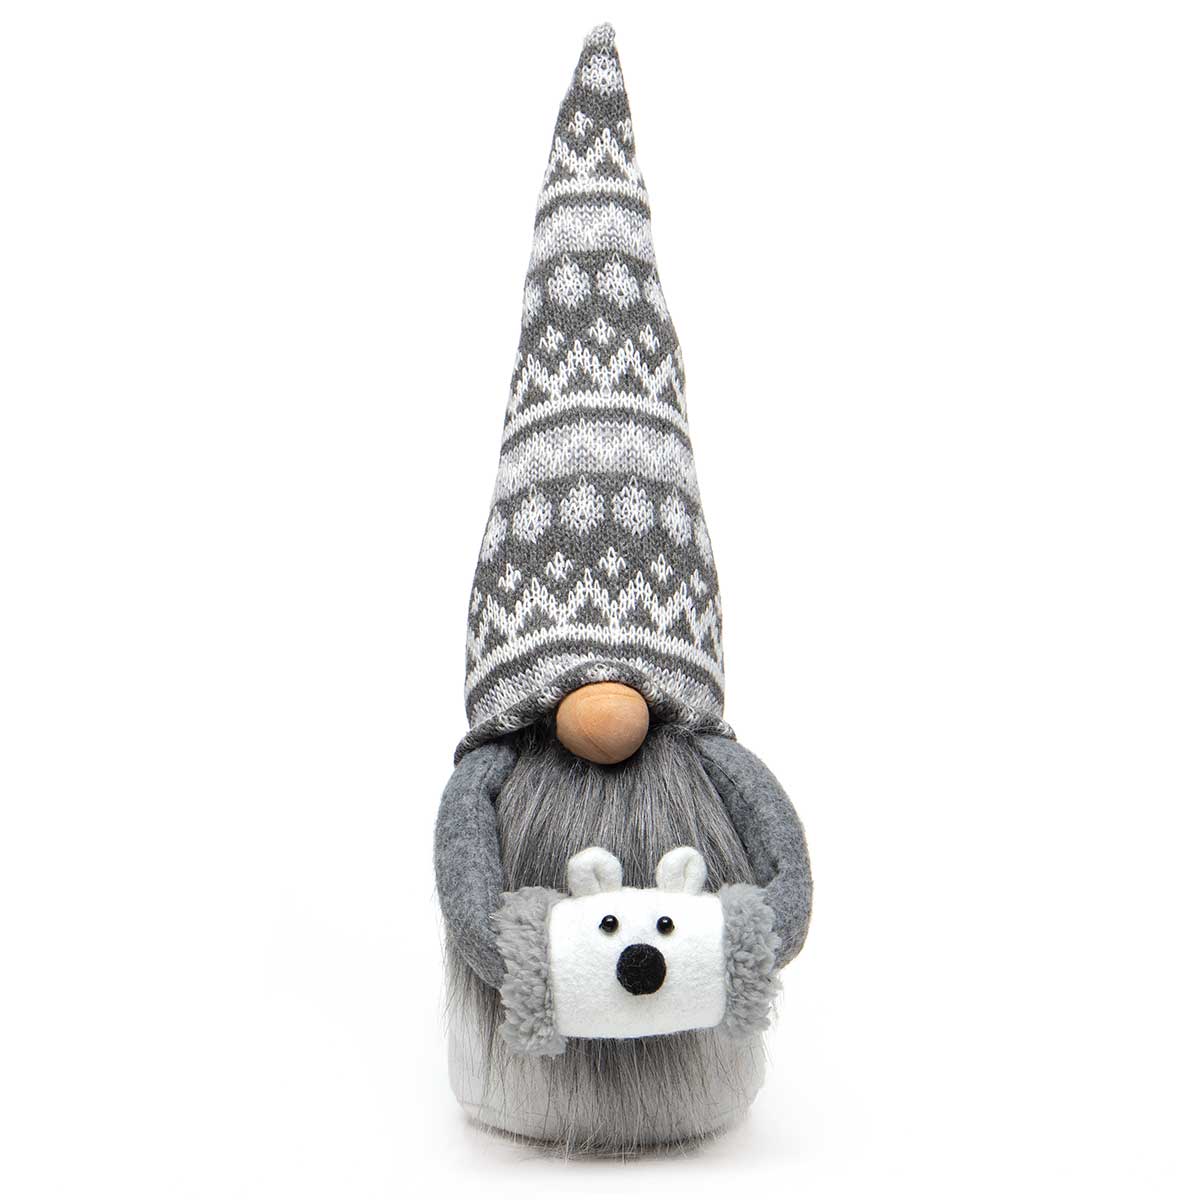 GNOME POLAR BEAR WITH MUFF LARGE 5IN X 3.5IN X 13.5IN POLYESTER